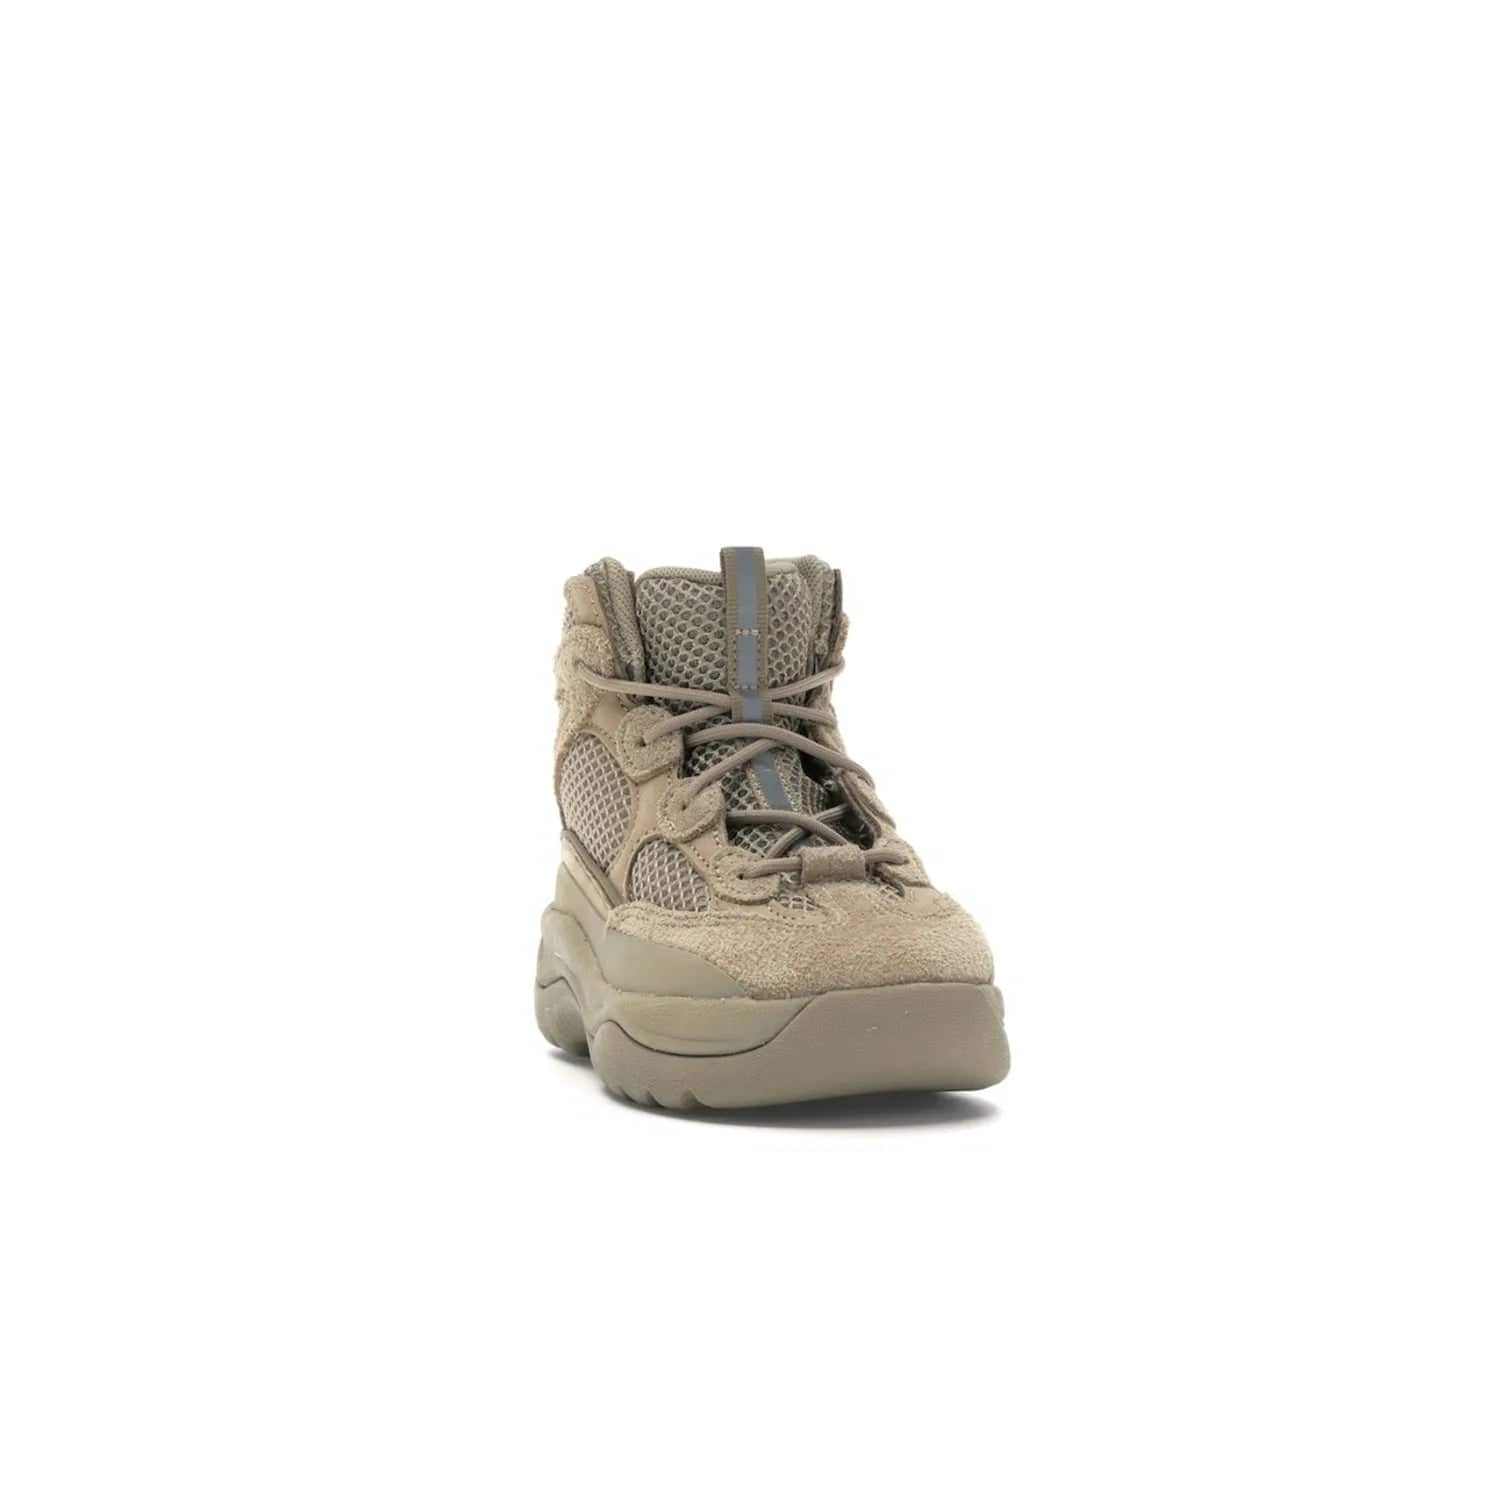 adidas Yeezy Desert Boot Rock (Kids) - Image 8 - Only at www.BallersClubKickz.com - Elevate your style this season with the adidas Yeezy Desert Boot Rock. Crafted from layered nylon and suede, this chic kids' silhouette features an EVA midsole and rubber outsole for superior cushioning and traction.